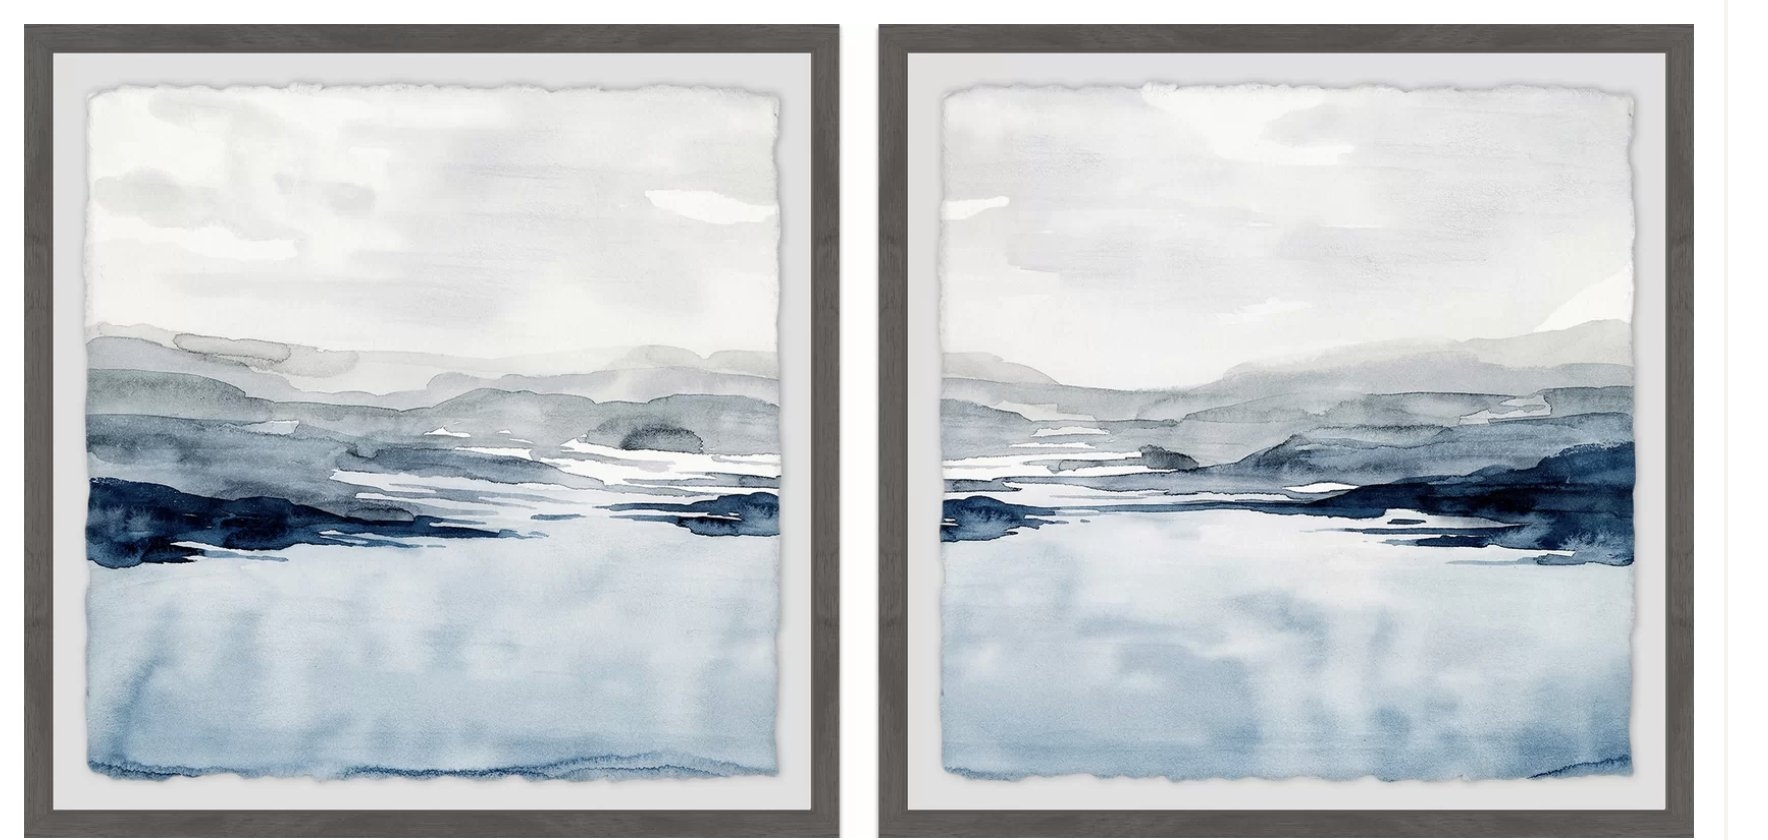 'Faded Horizon III Diptych' 2 Piece Framed Watercolor Painting Print Set - Image 0